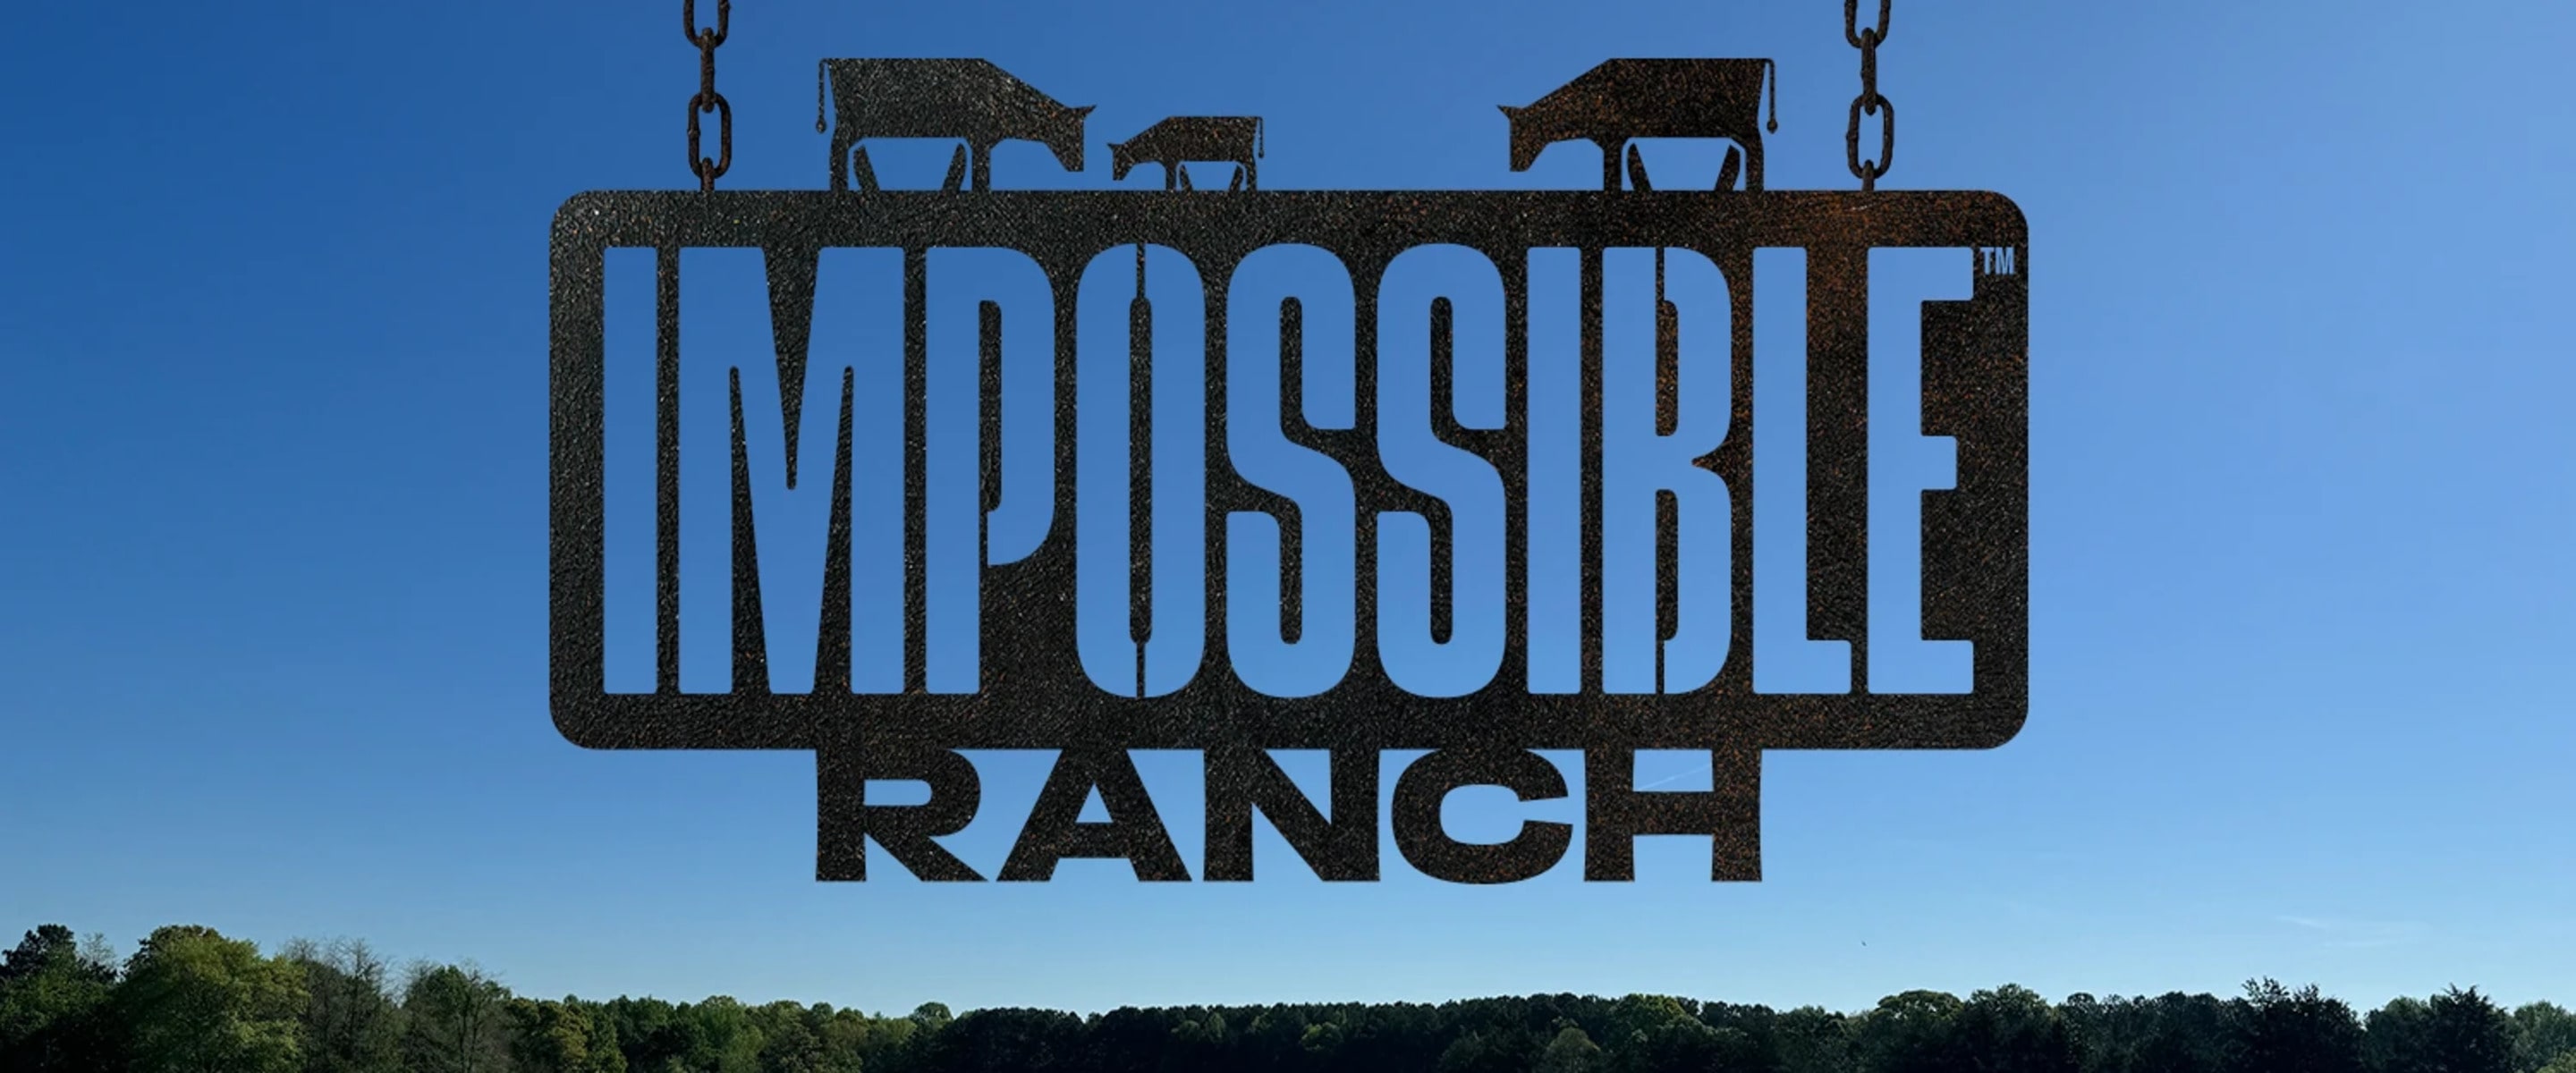 Impossible Foods Is Opening a Cattle-Free Ranch, But Vegan Restaurants Are Serving Meat: What's Going on in the Food Industry Right Now?